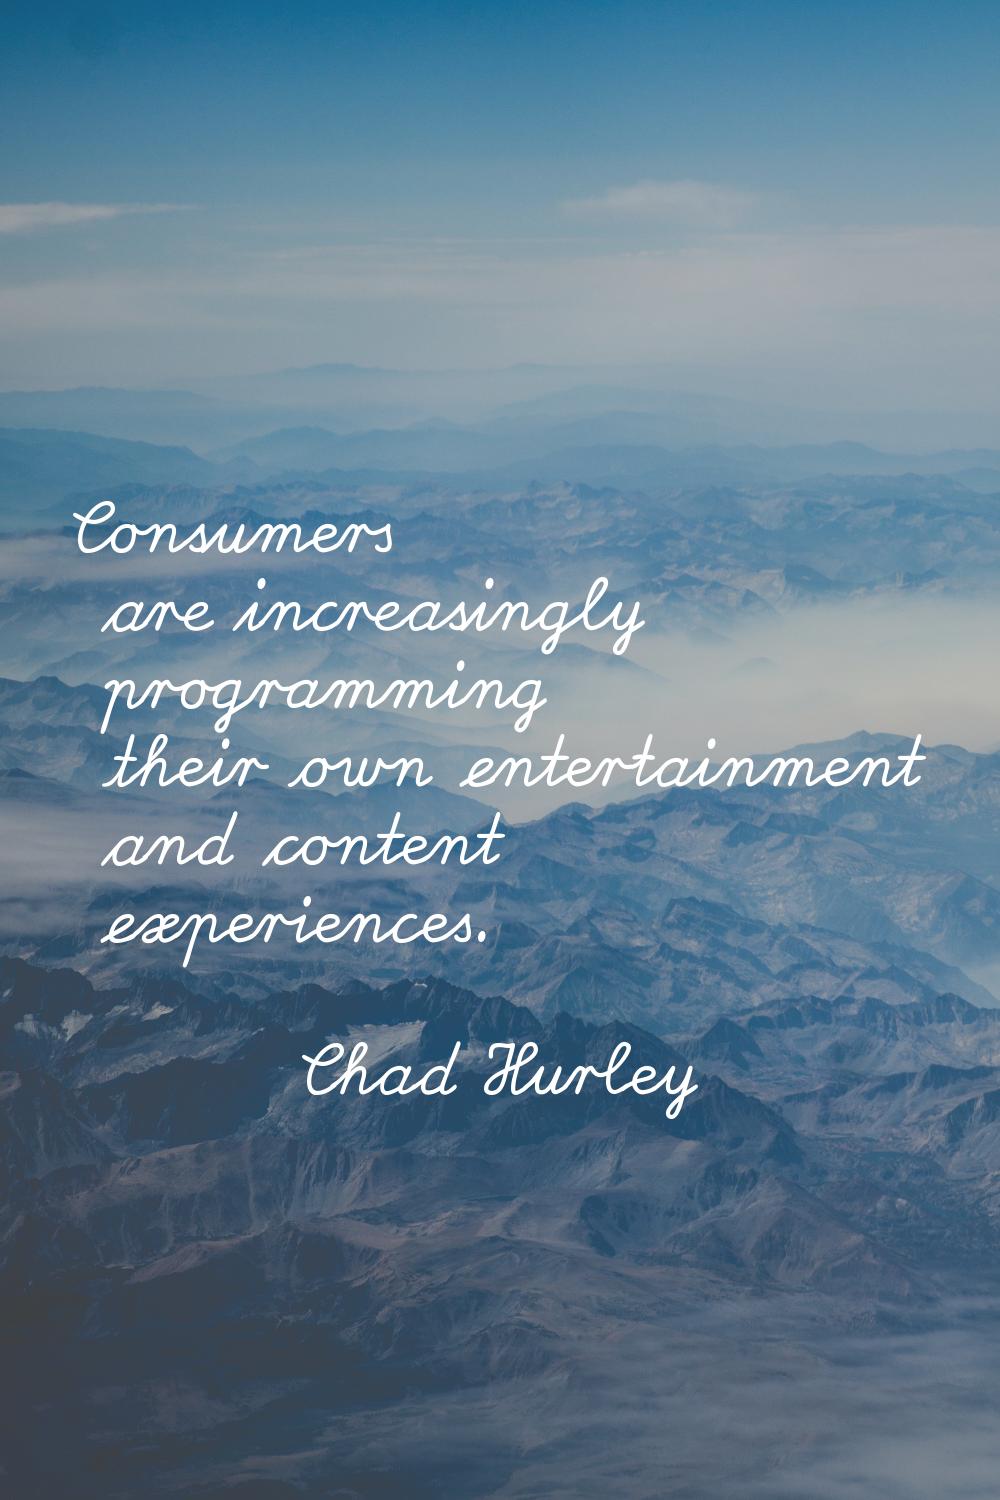 Consumers are increasingly programming their own entertainment and content experiences.